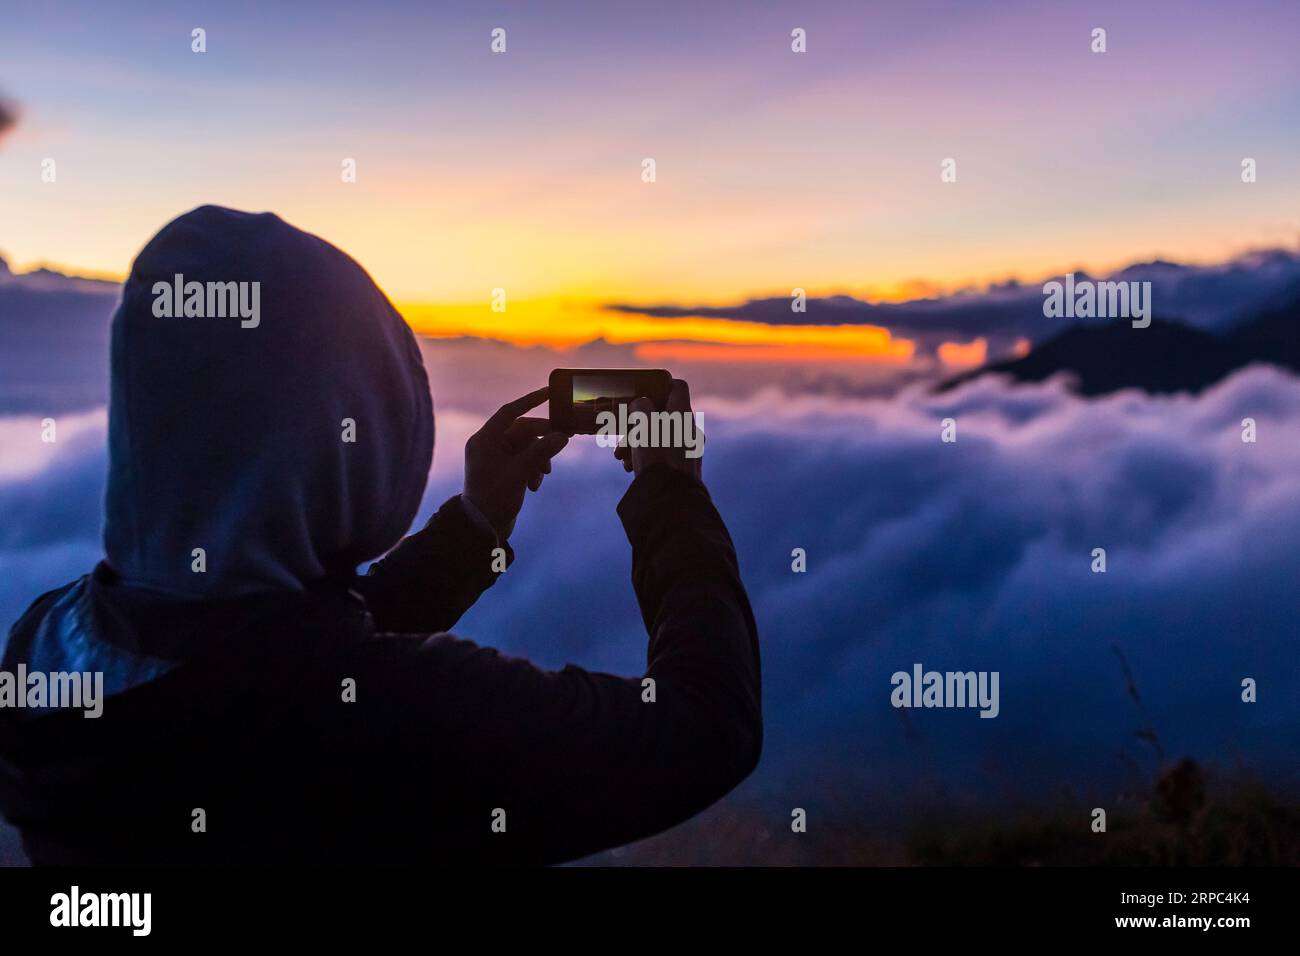 Man takes photos with smartphone in mountains at sunrise Stock Photo